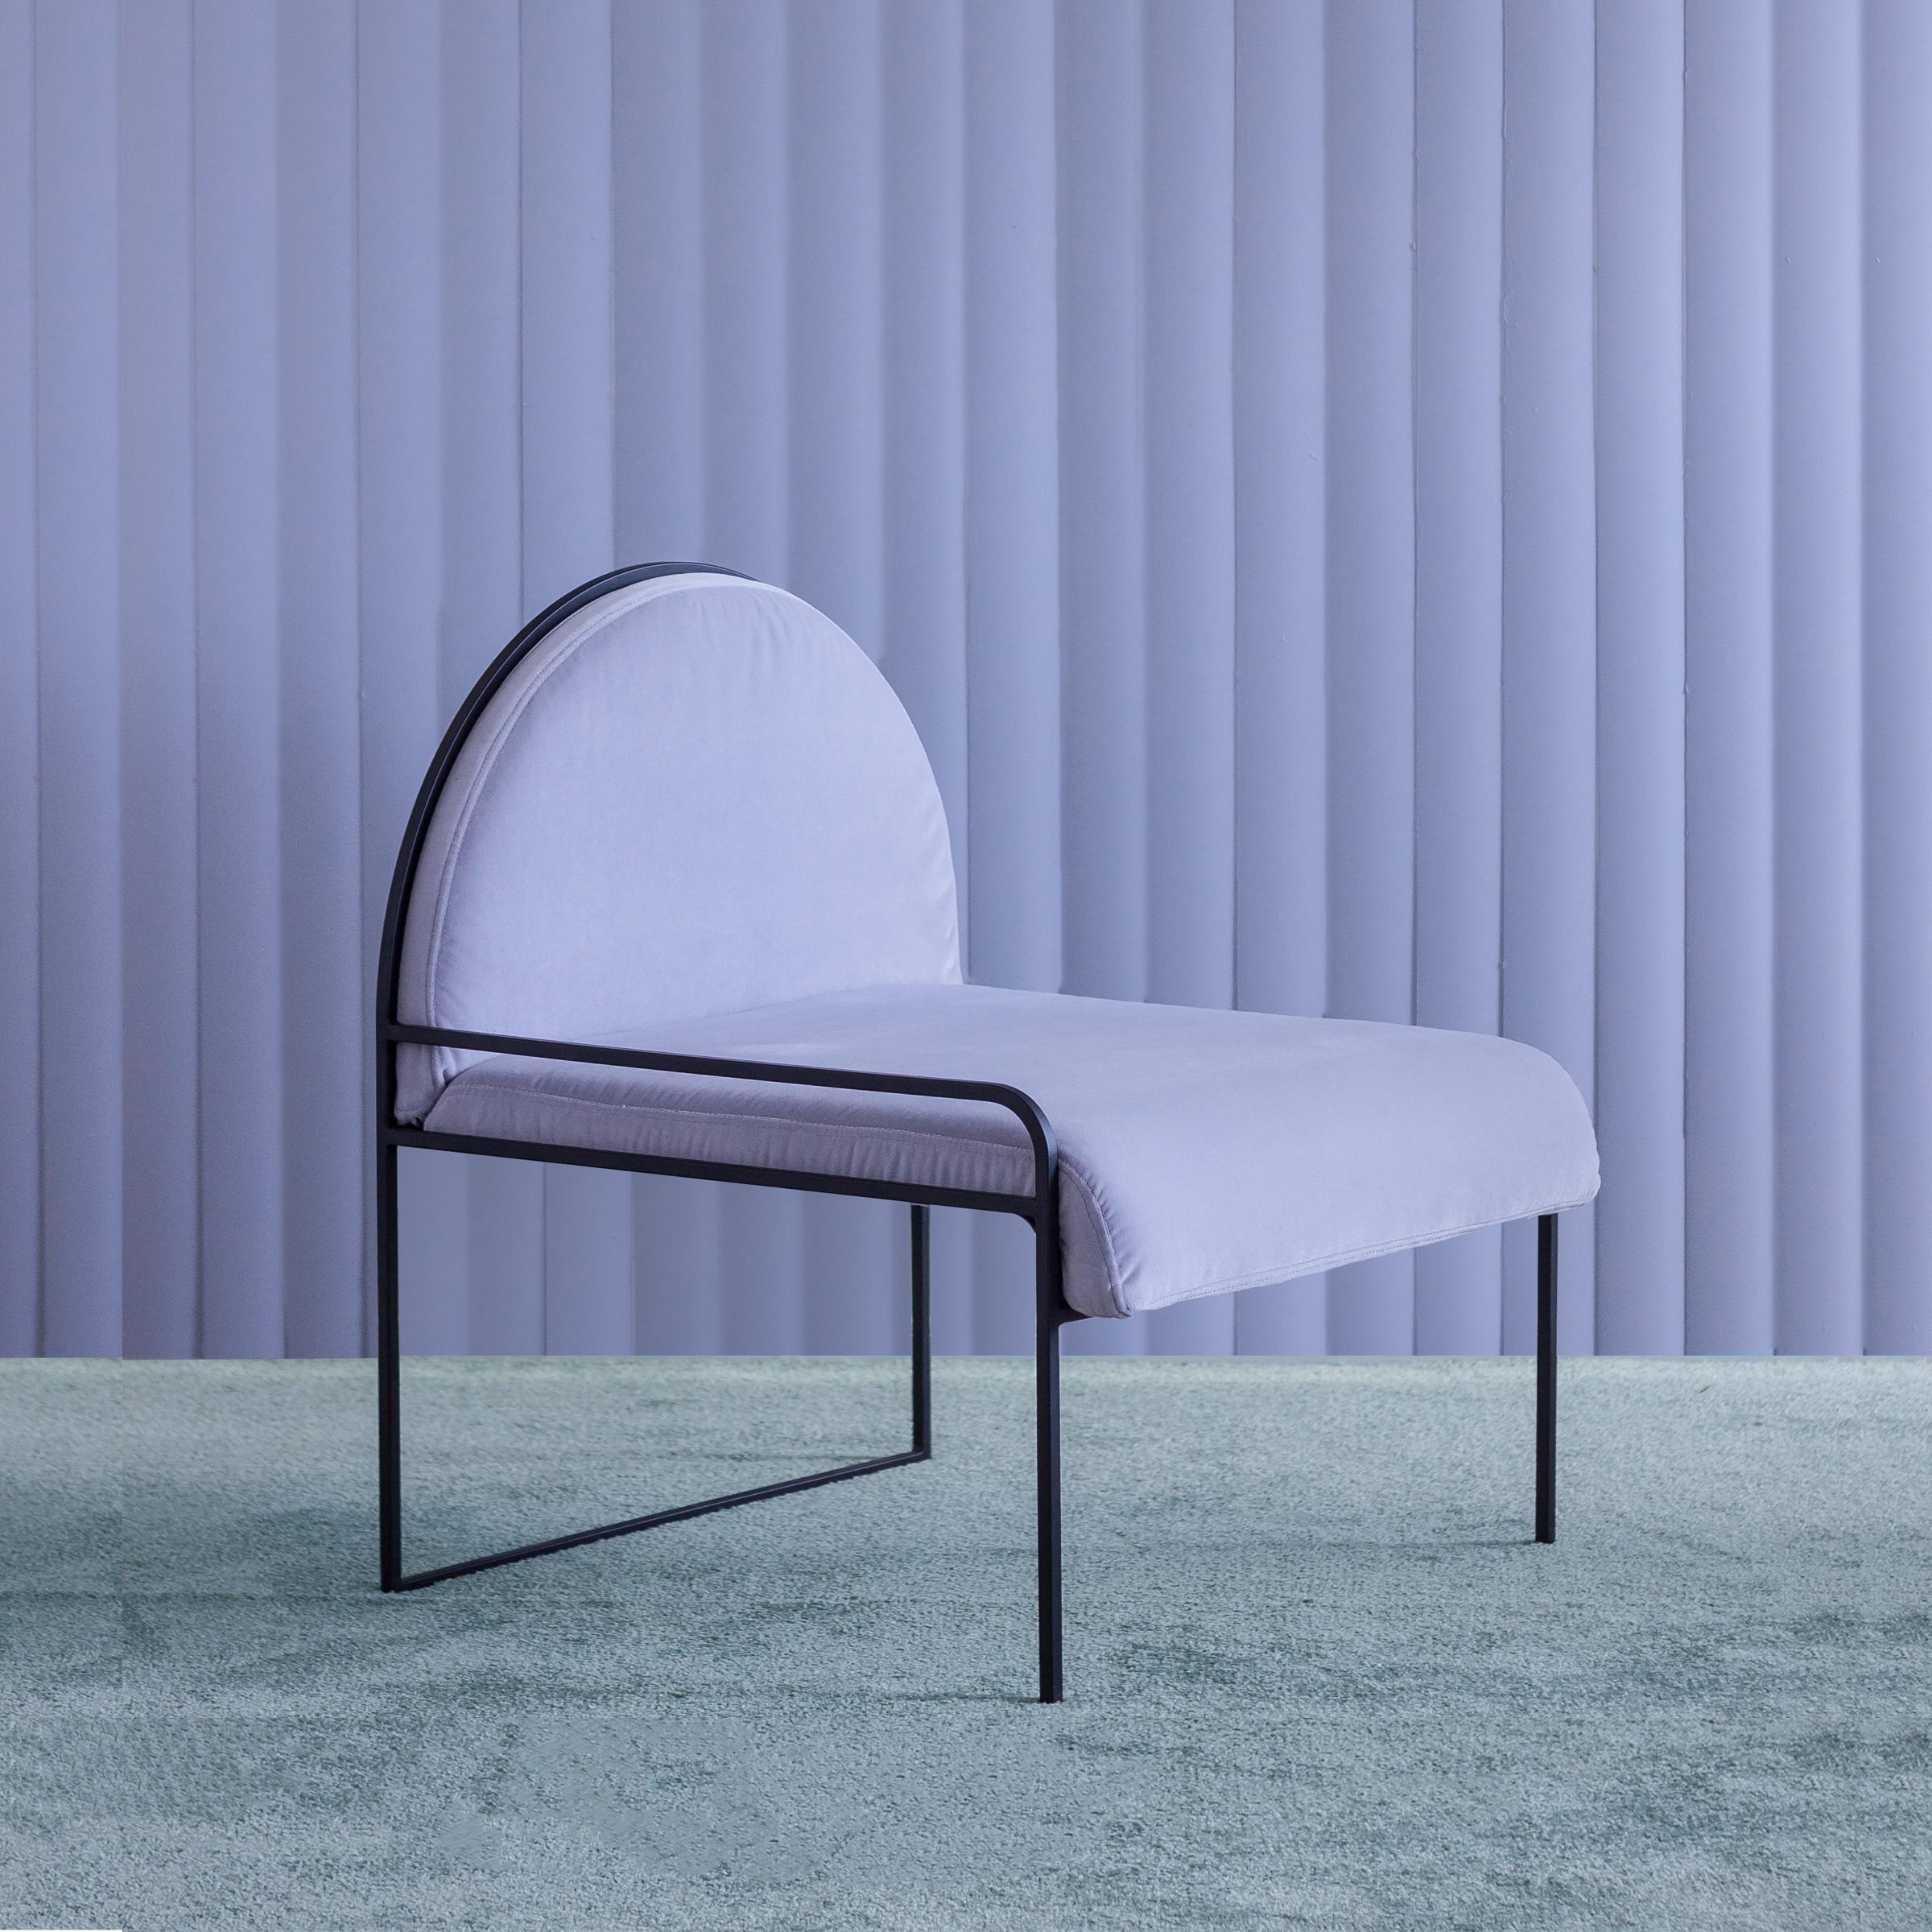 SW velvet chair by Soft-geometry
Materials: Velvet, Stainless steel
Dimensions: 26 x 26 x 30” H

Chair dressed in crisp velvet upholstery on a simple arched frame in stainless steel. Finding a delicate softness within its stark minimalism and